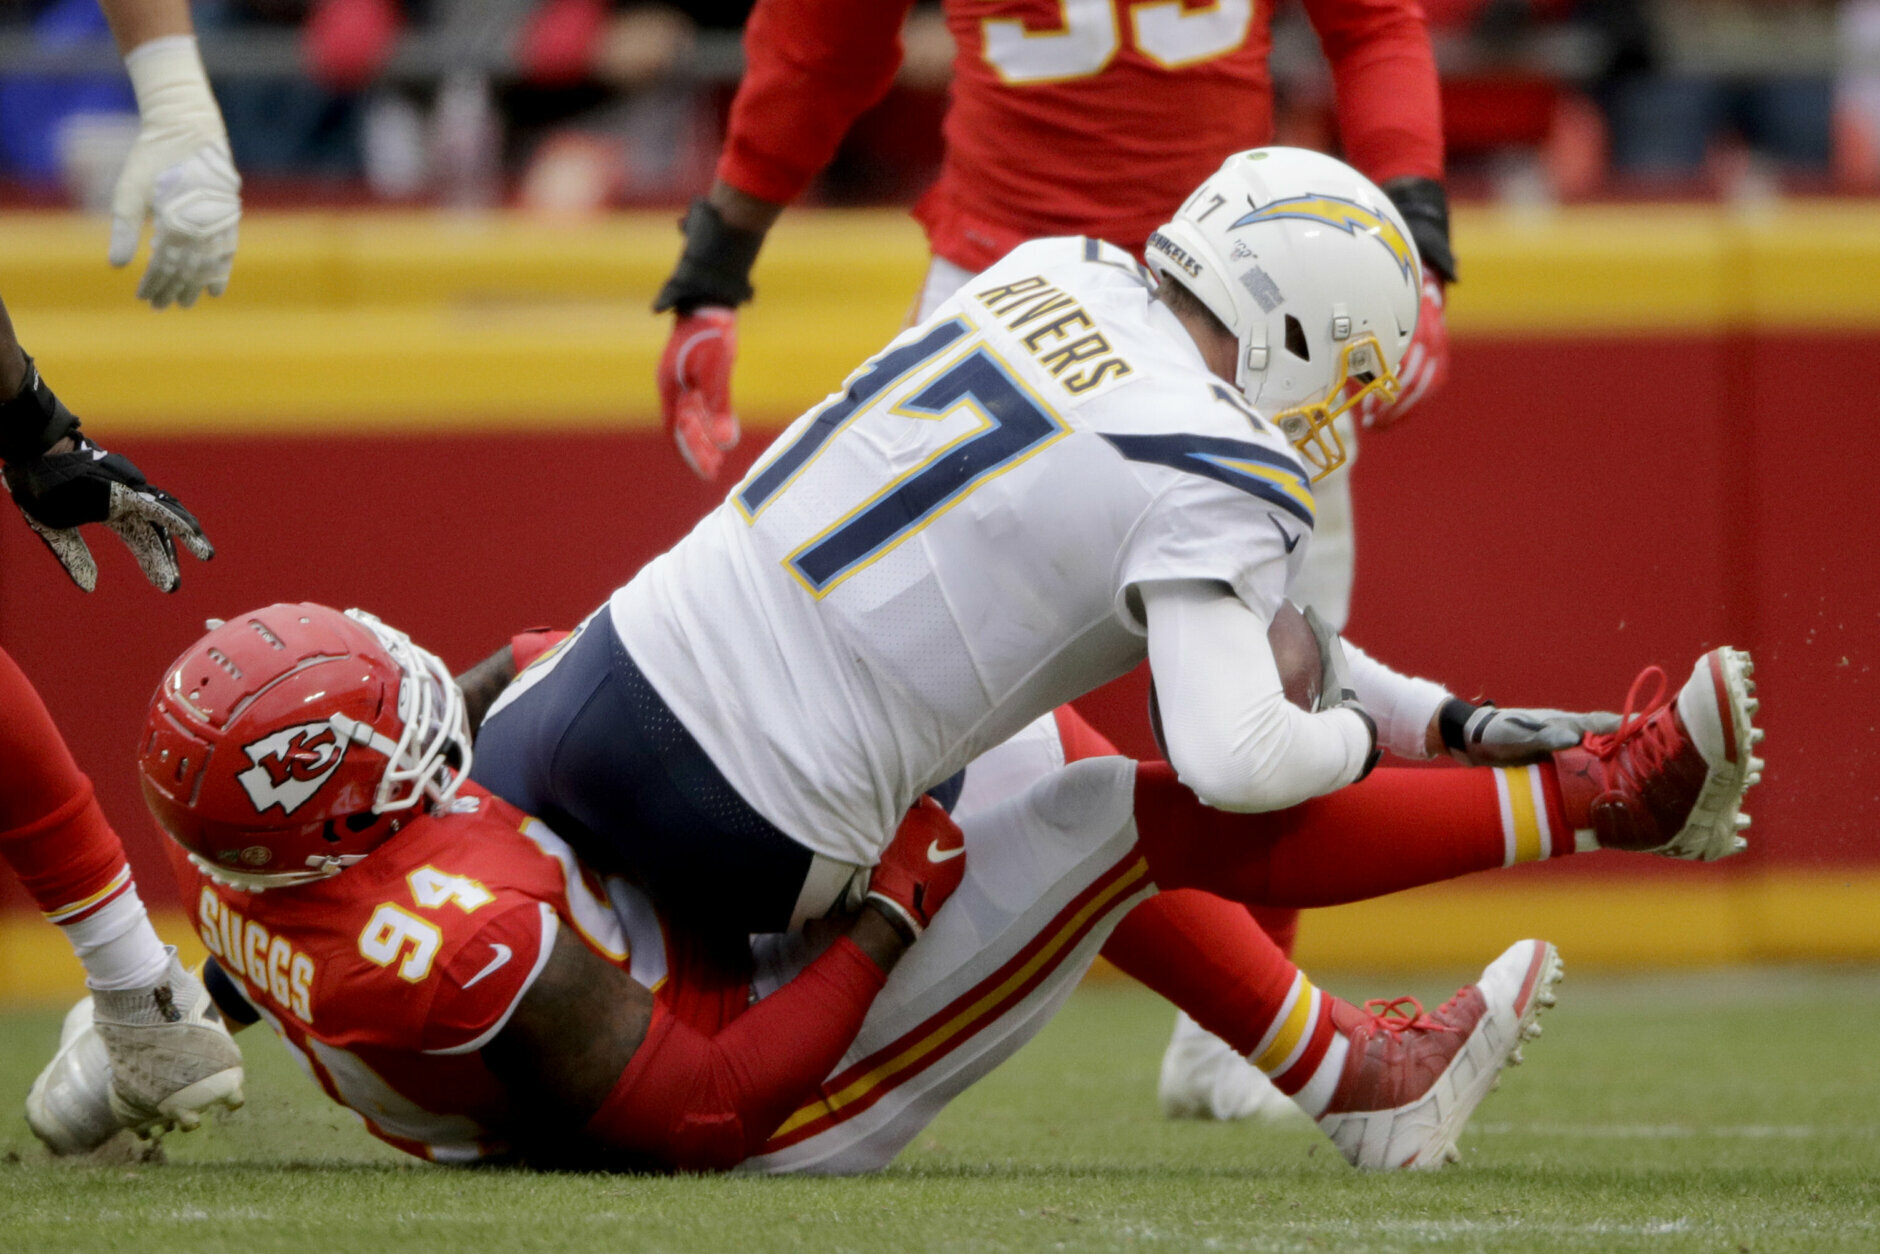 <p><b><i>Chargers 21</i></b><br />
<b><i>Chiefs 31</i></b></p>
<p>Kansas City gratefully accepted its belated Christmas gift from Miami and locked up the 2-seed in the AFC and a first-round bye. With T-Sizzle donning red, the Chiefs truly are the greatest threat to Baltimore&#8217;s coronation.</p>
<p>If this is the end of the line for Philip Rivers as a Charger, he leaves with his second 20-INT season on a last-place team amid justifiable questions about how much the 38-year-old can help L.A. (or any other team) in a league where his lack of mobility and penchant for picks likely outweighs his wealth of experience. He and Eli Manning should walk away while they still can.</p>
